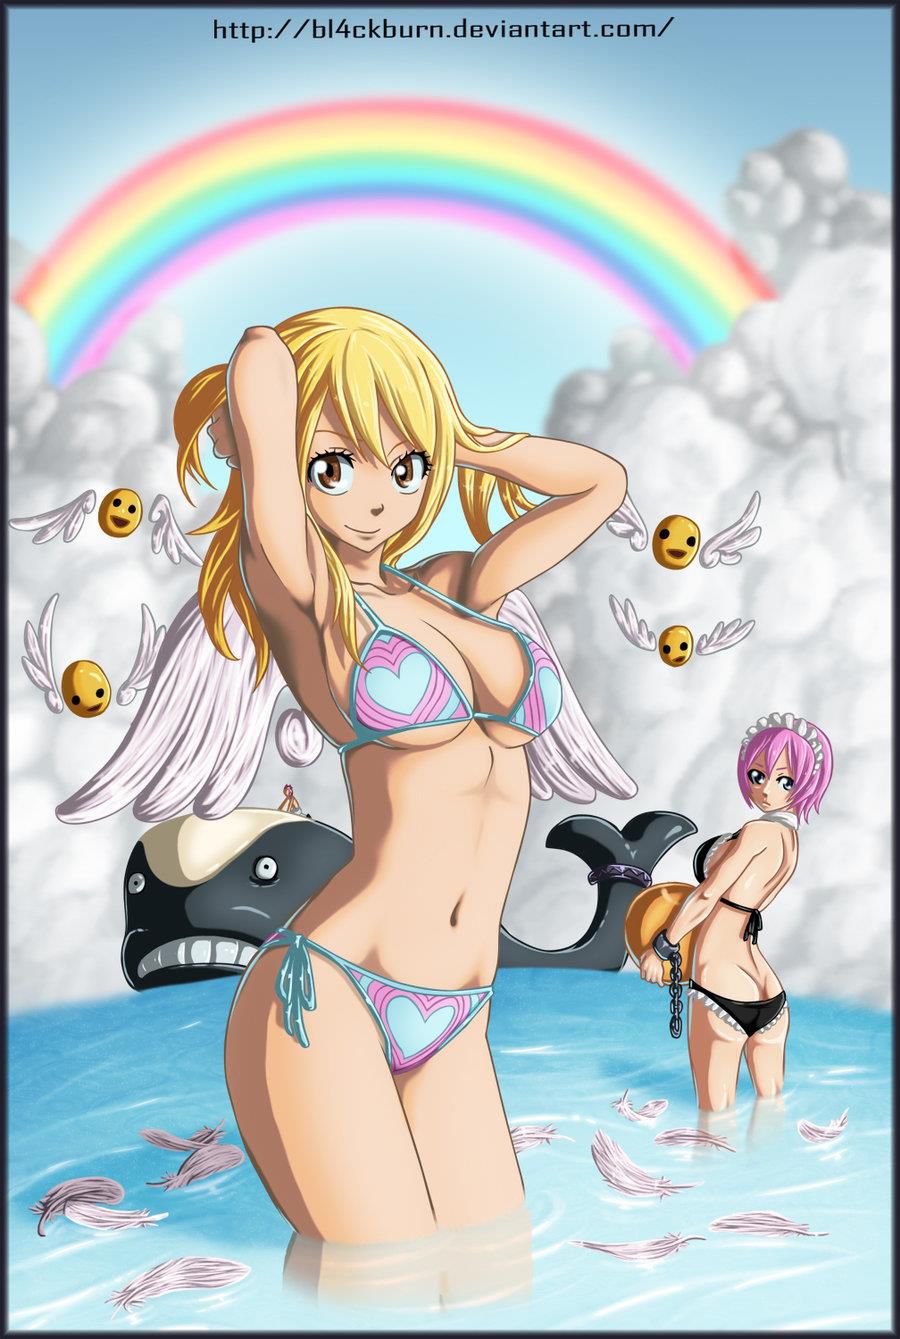 "FAIRY TAIL" (fairy tale) "FT" erotic images Vol 2 12